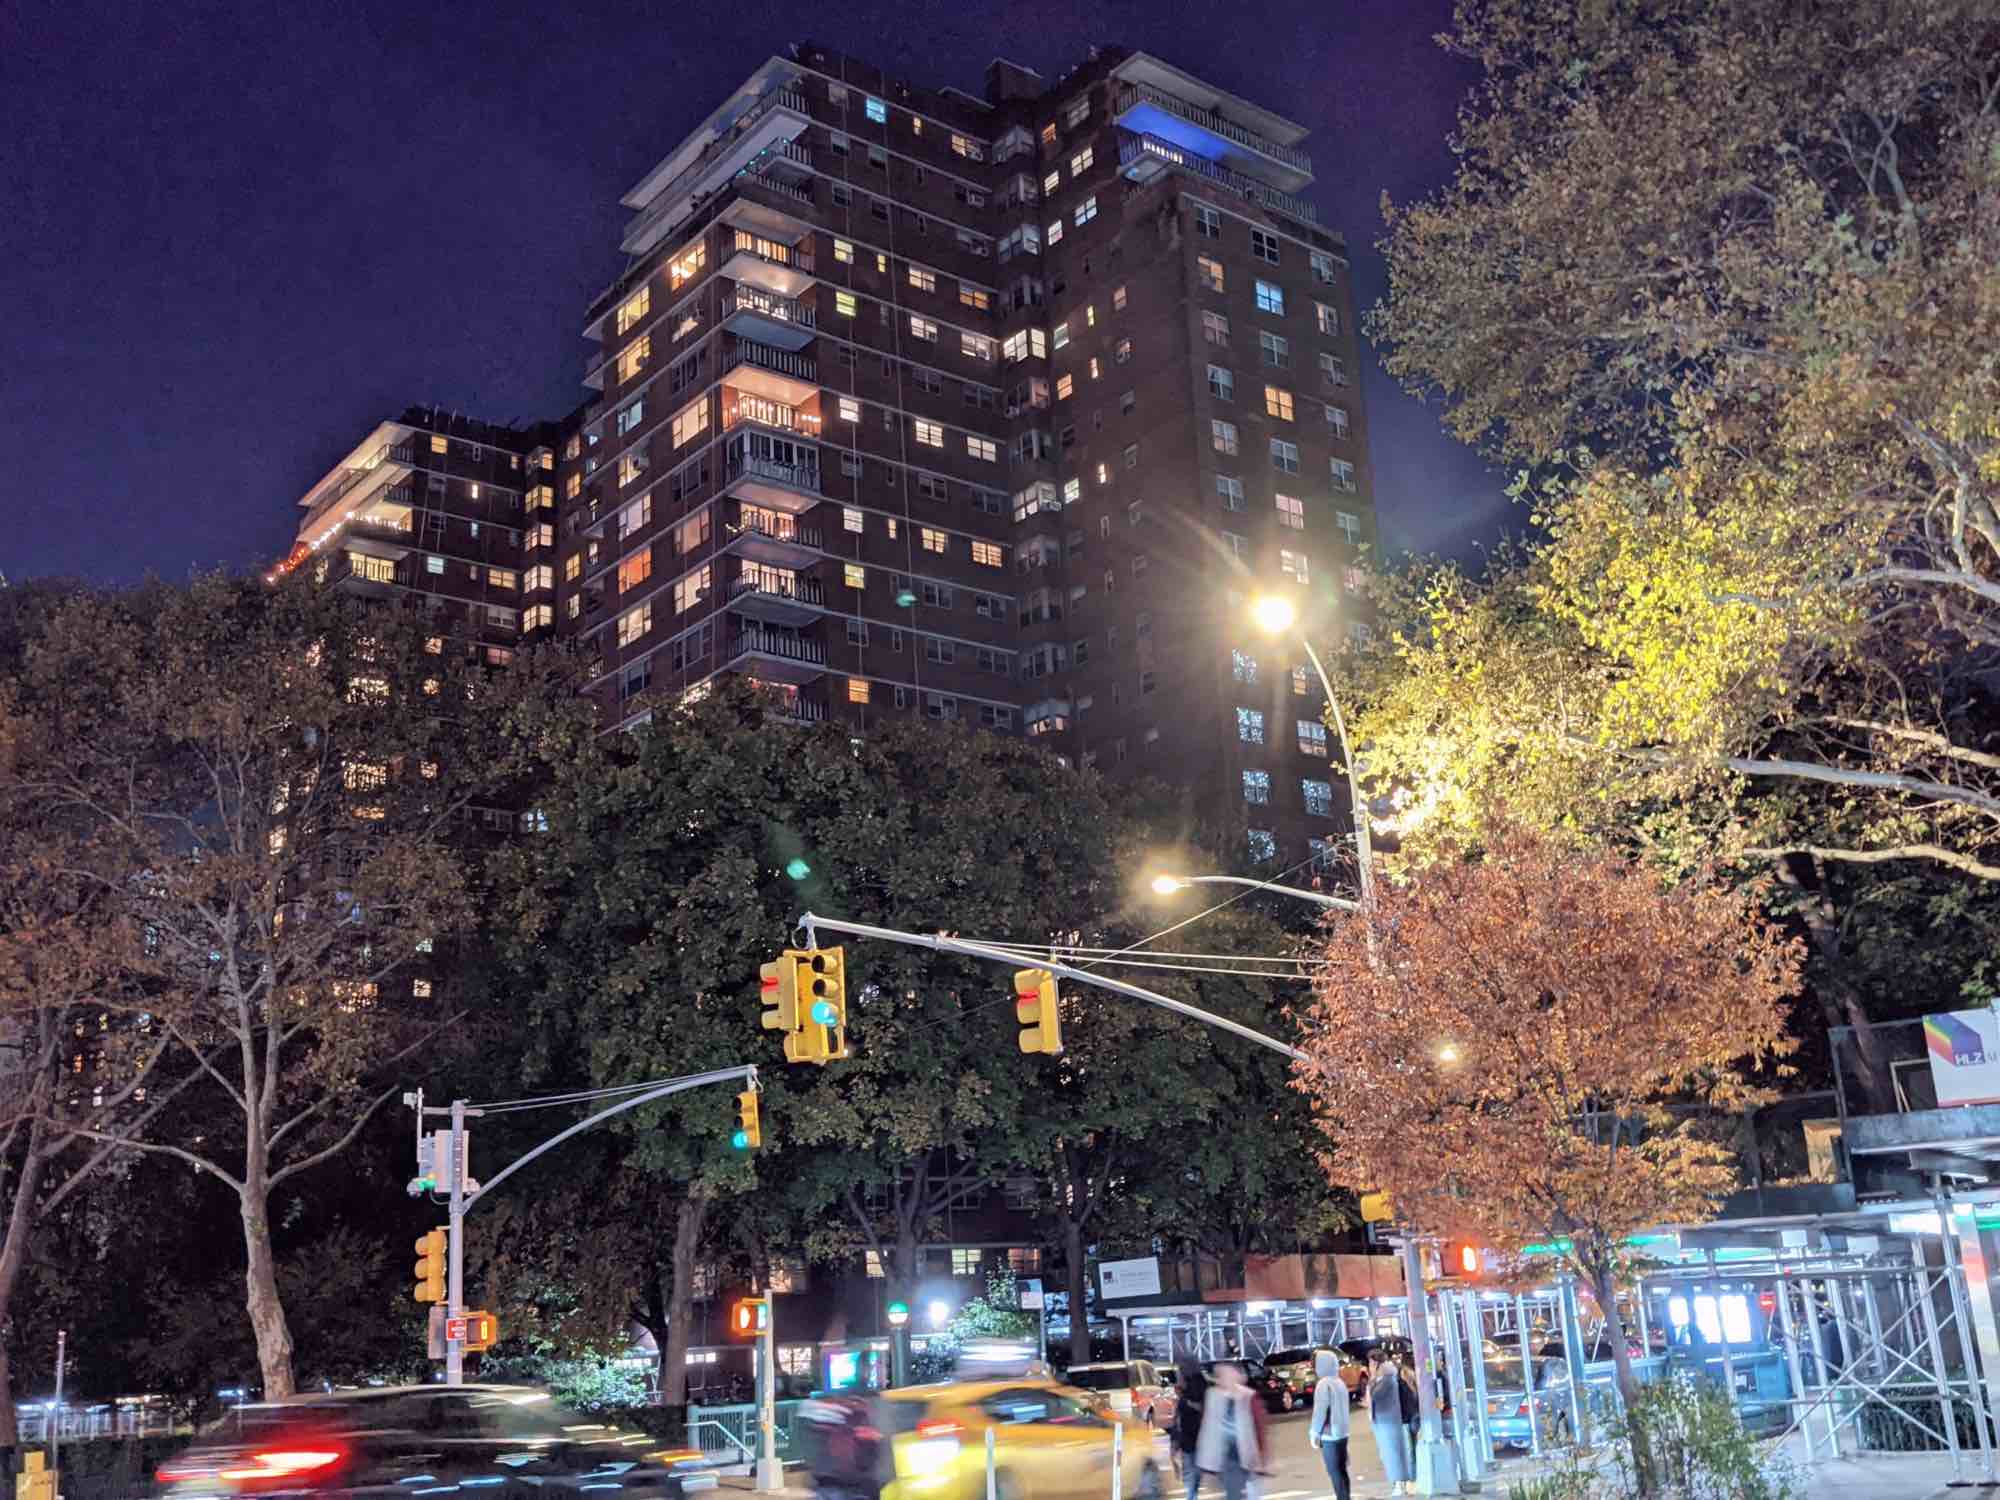 A view of the Penn South Mitchell-Lama apartments in Chelsea at twilight from the street.